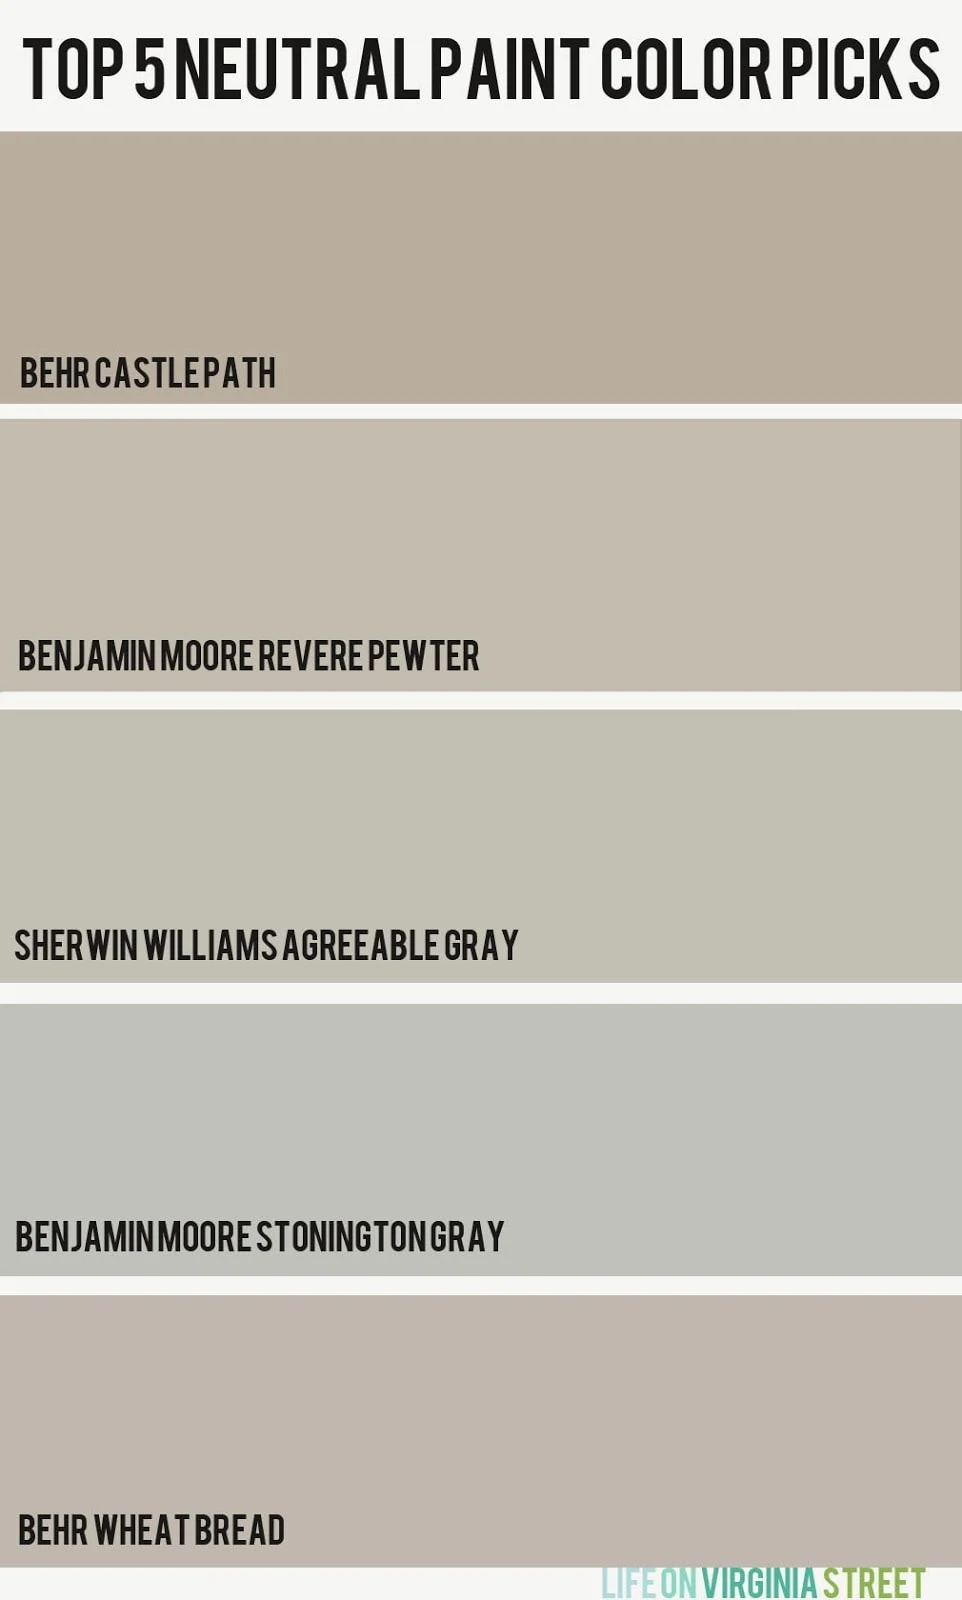 A paint swatch with 5 neutral paint color picks.